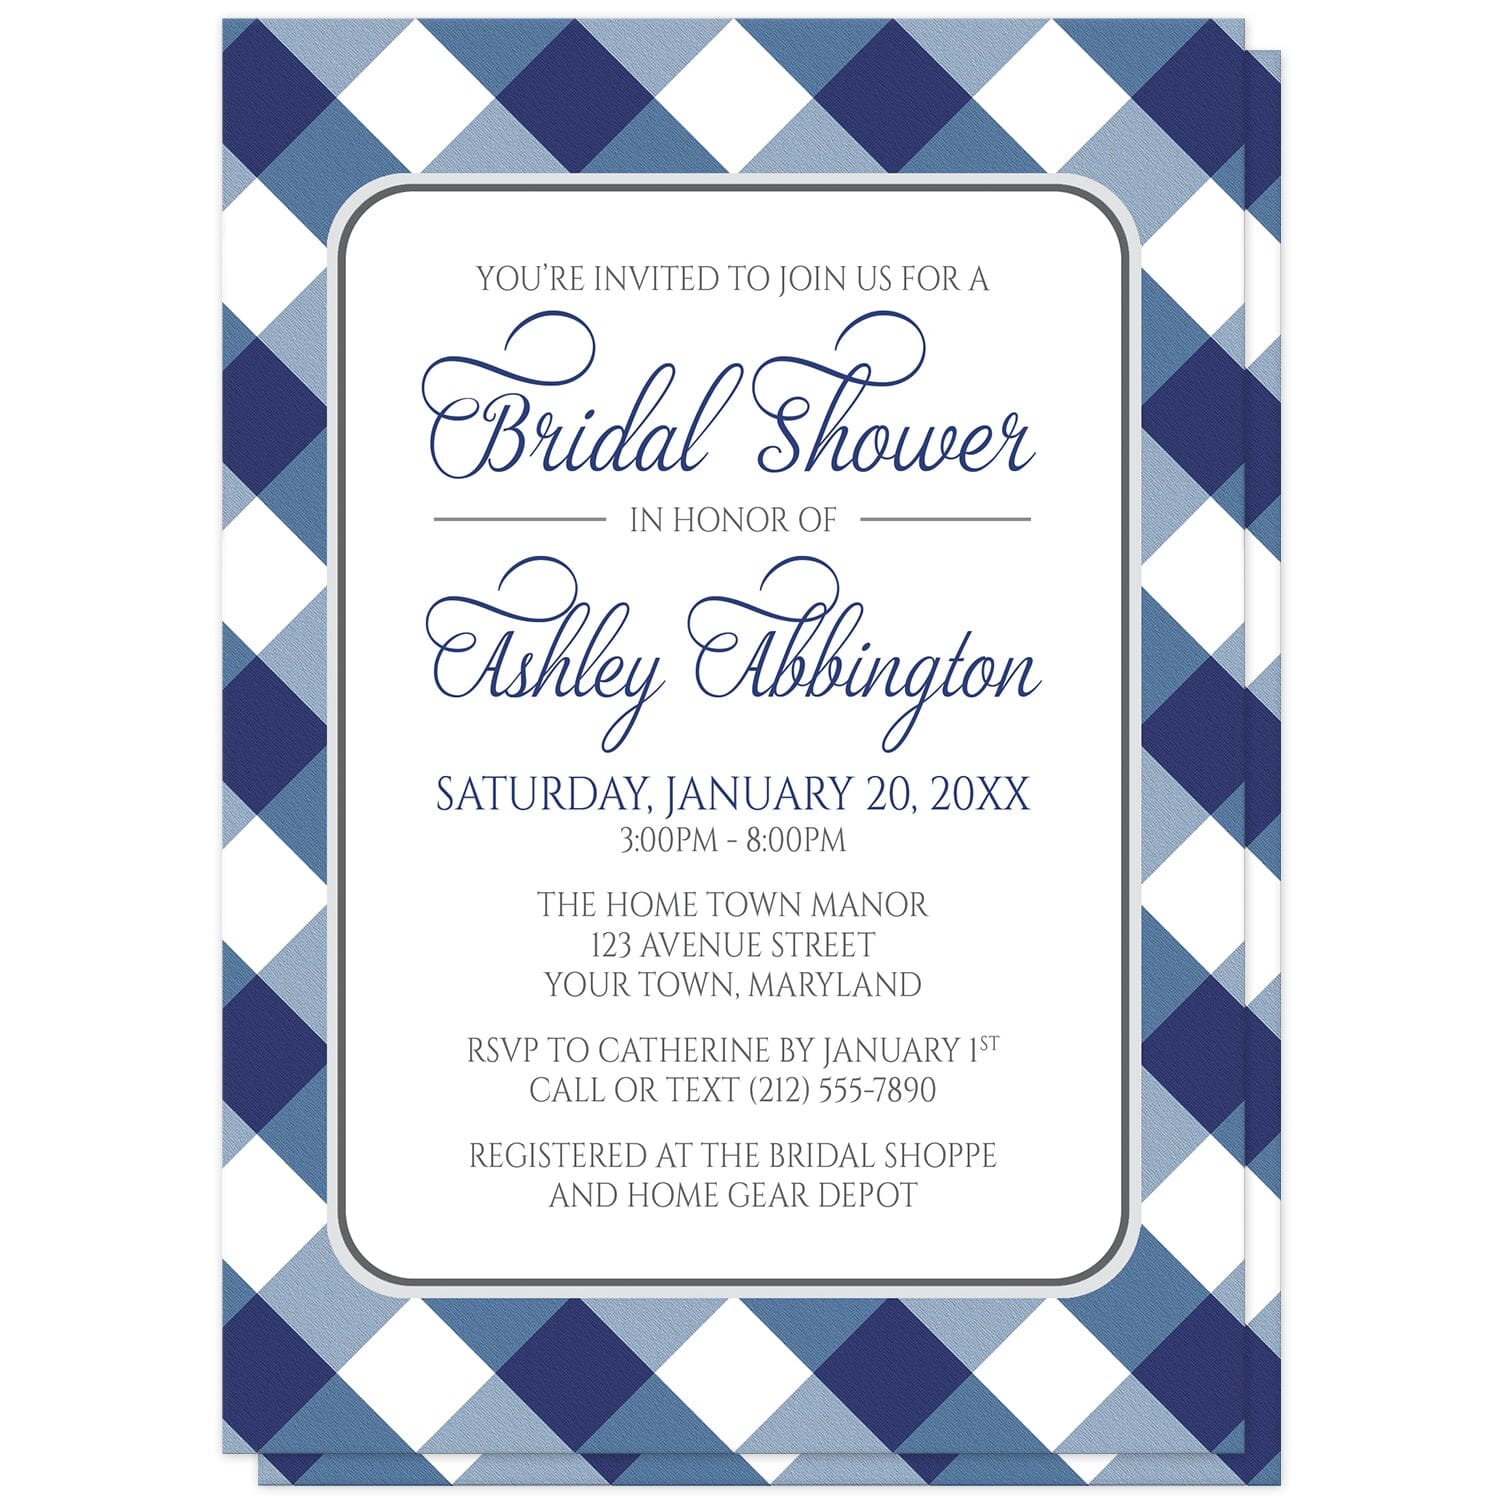 Navy Blue Gingham Bridal Shower Invitations at Artistically Invited. Navy blue gingham bridal shower invitations with your personalized bridal shower celebration details custom printed in blue and gray inside a white rectangular area outlined in gray. The background design is a diagonal blue and white gingham pattern which is also printed on the back side of the invitations. 